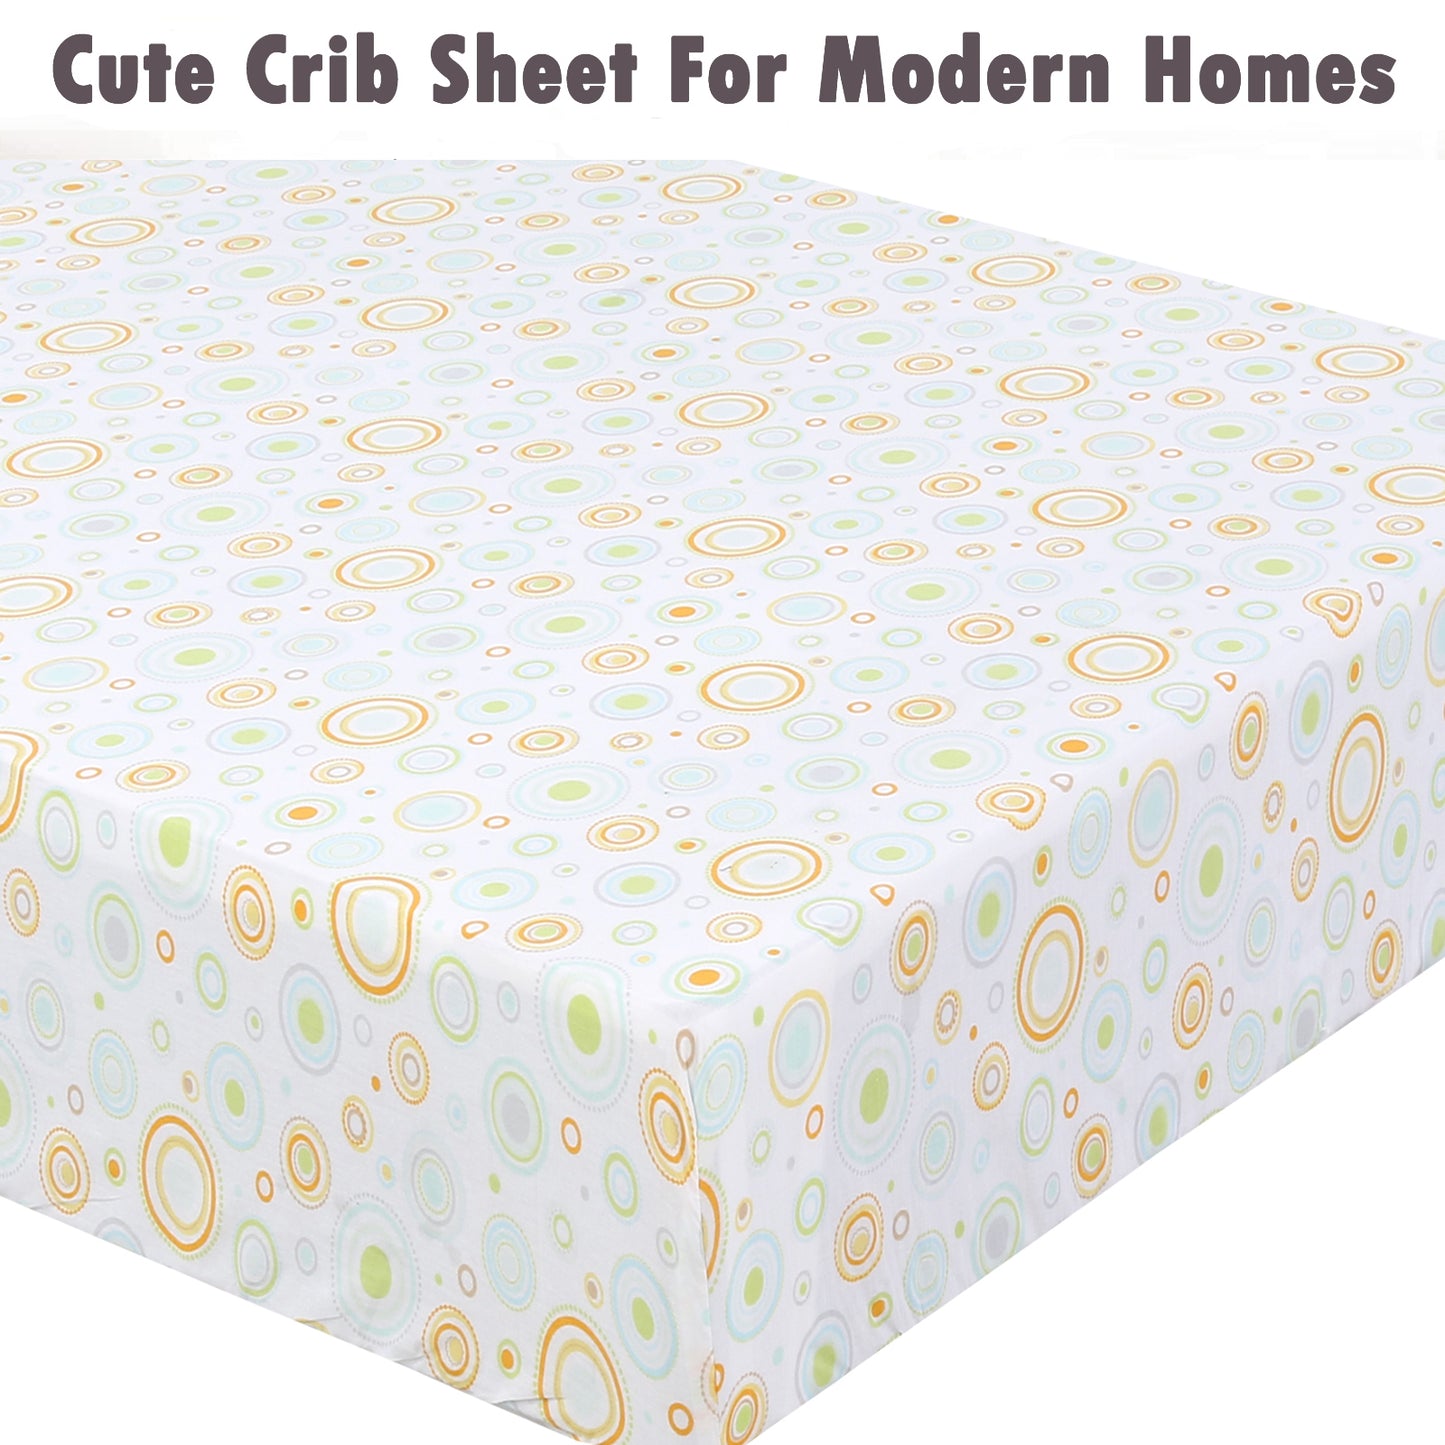 3 Piece Crib/Toddler Cotton Fitted Sheets Green Yellow Polka Dots & Giraffes